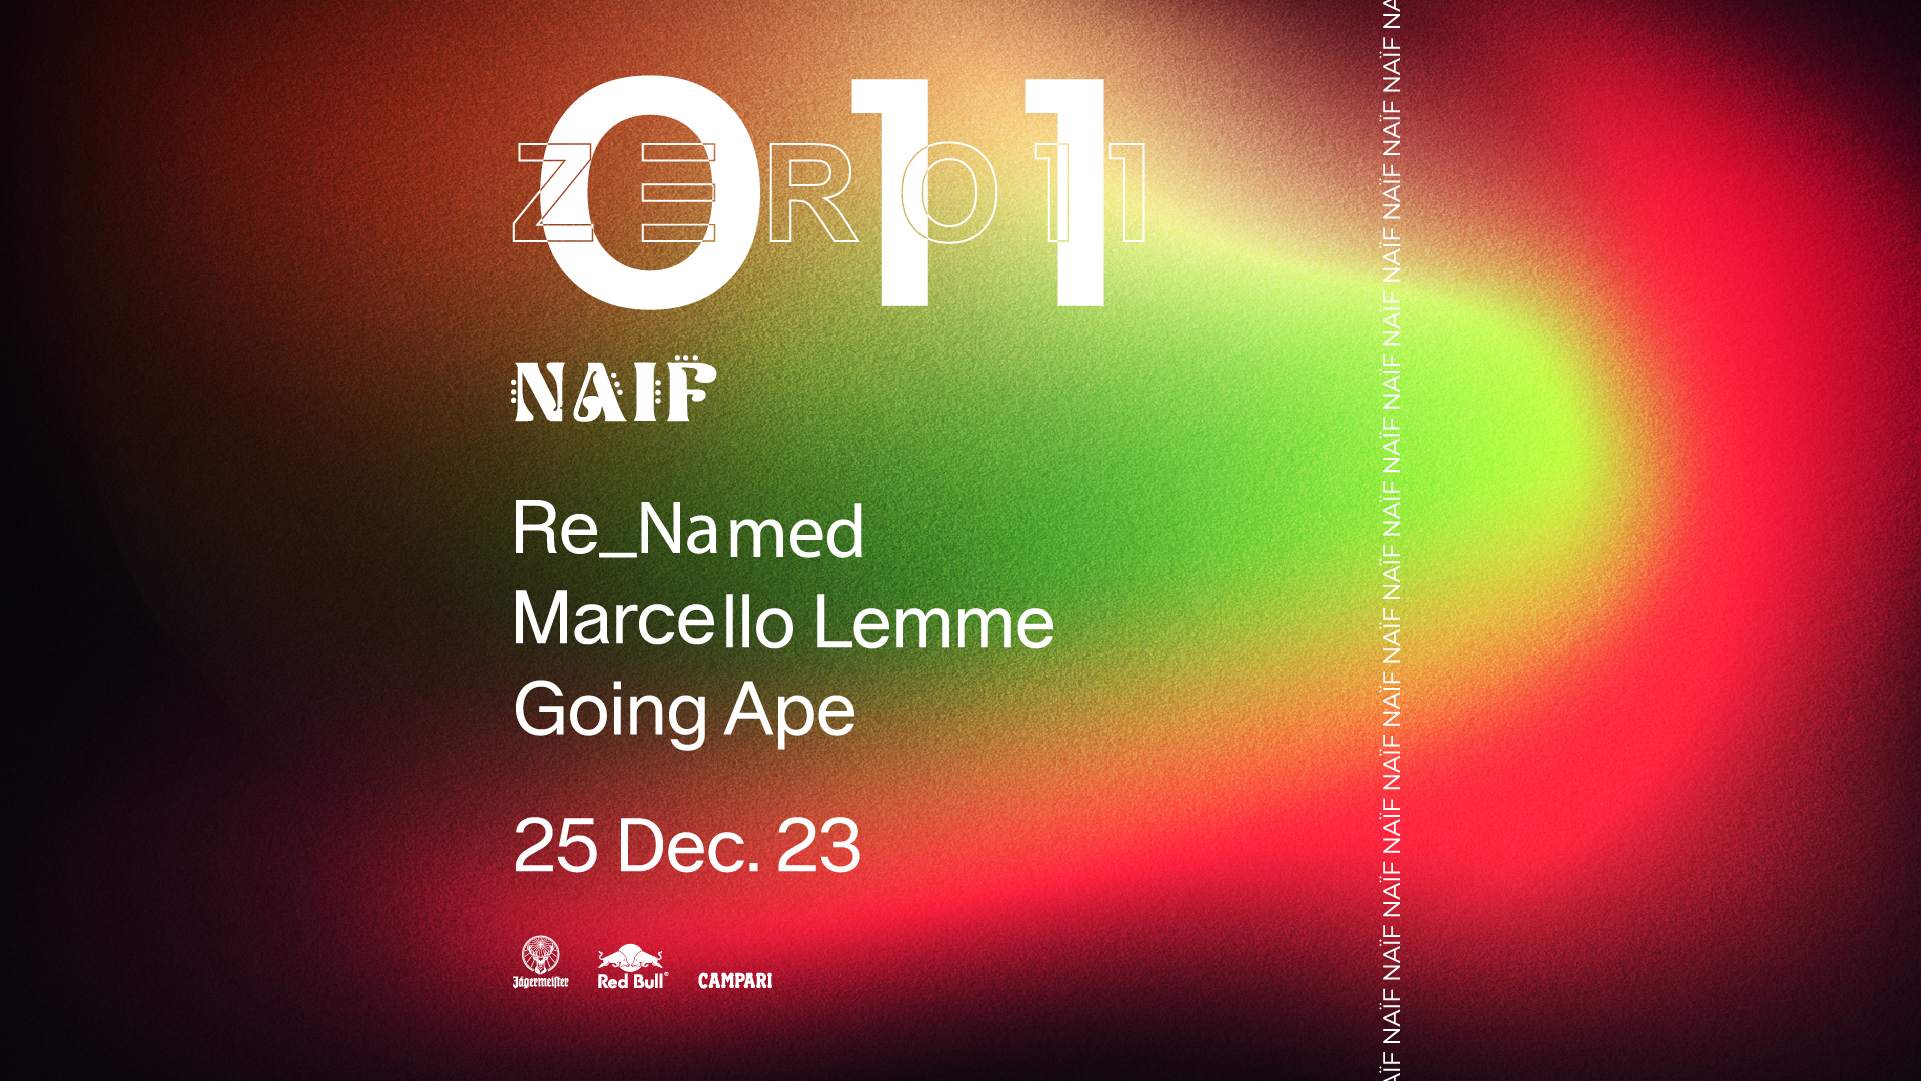 Club Zero11 pres. NAIF with Re_Named, Marcello Lemme, Going Ape - Página frontal